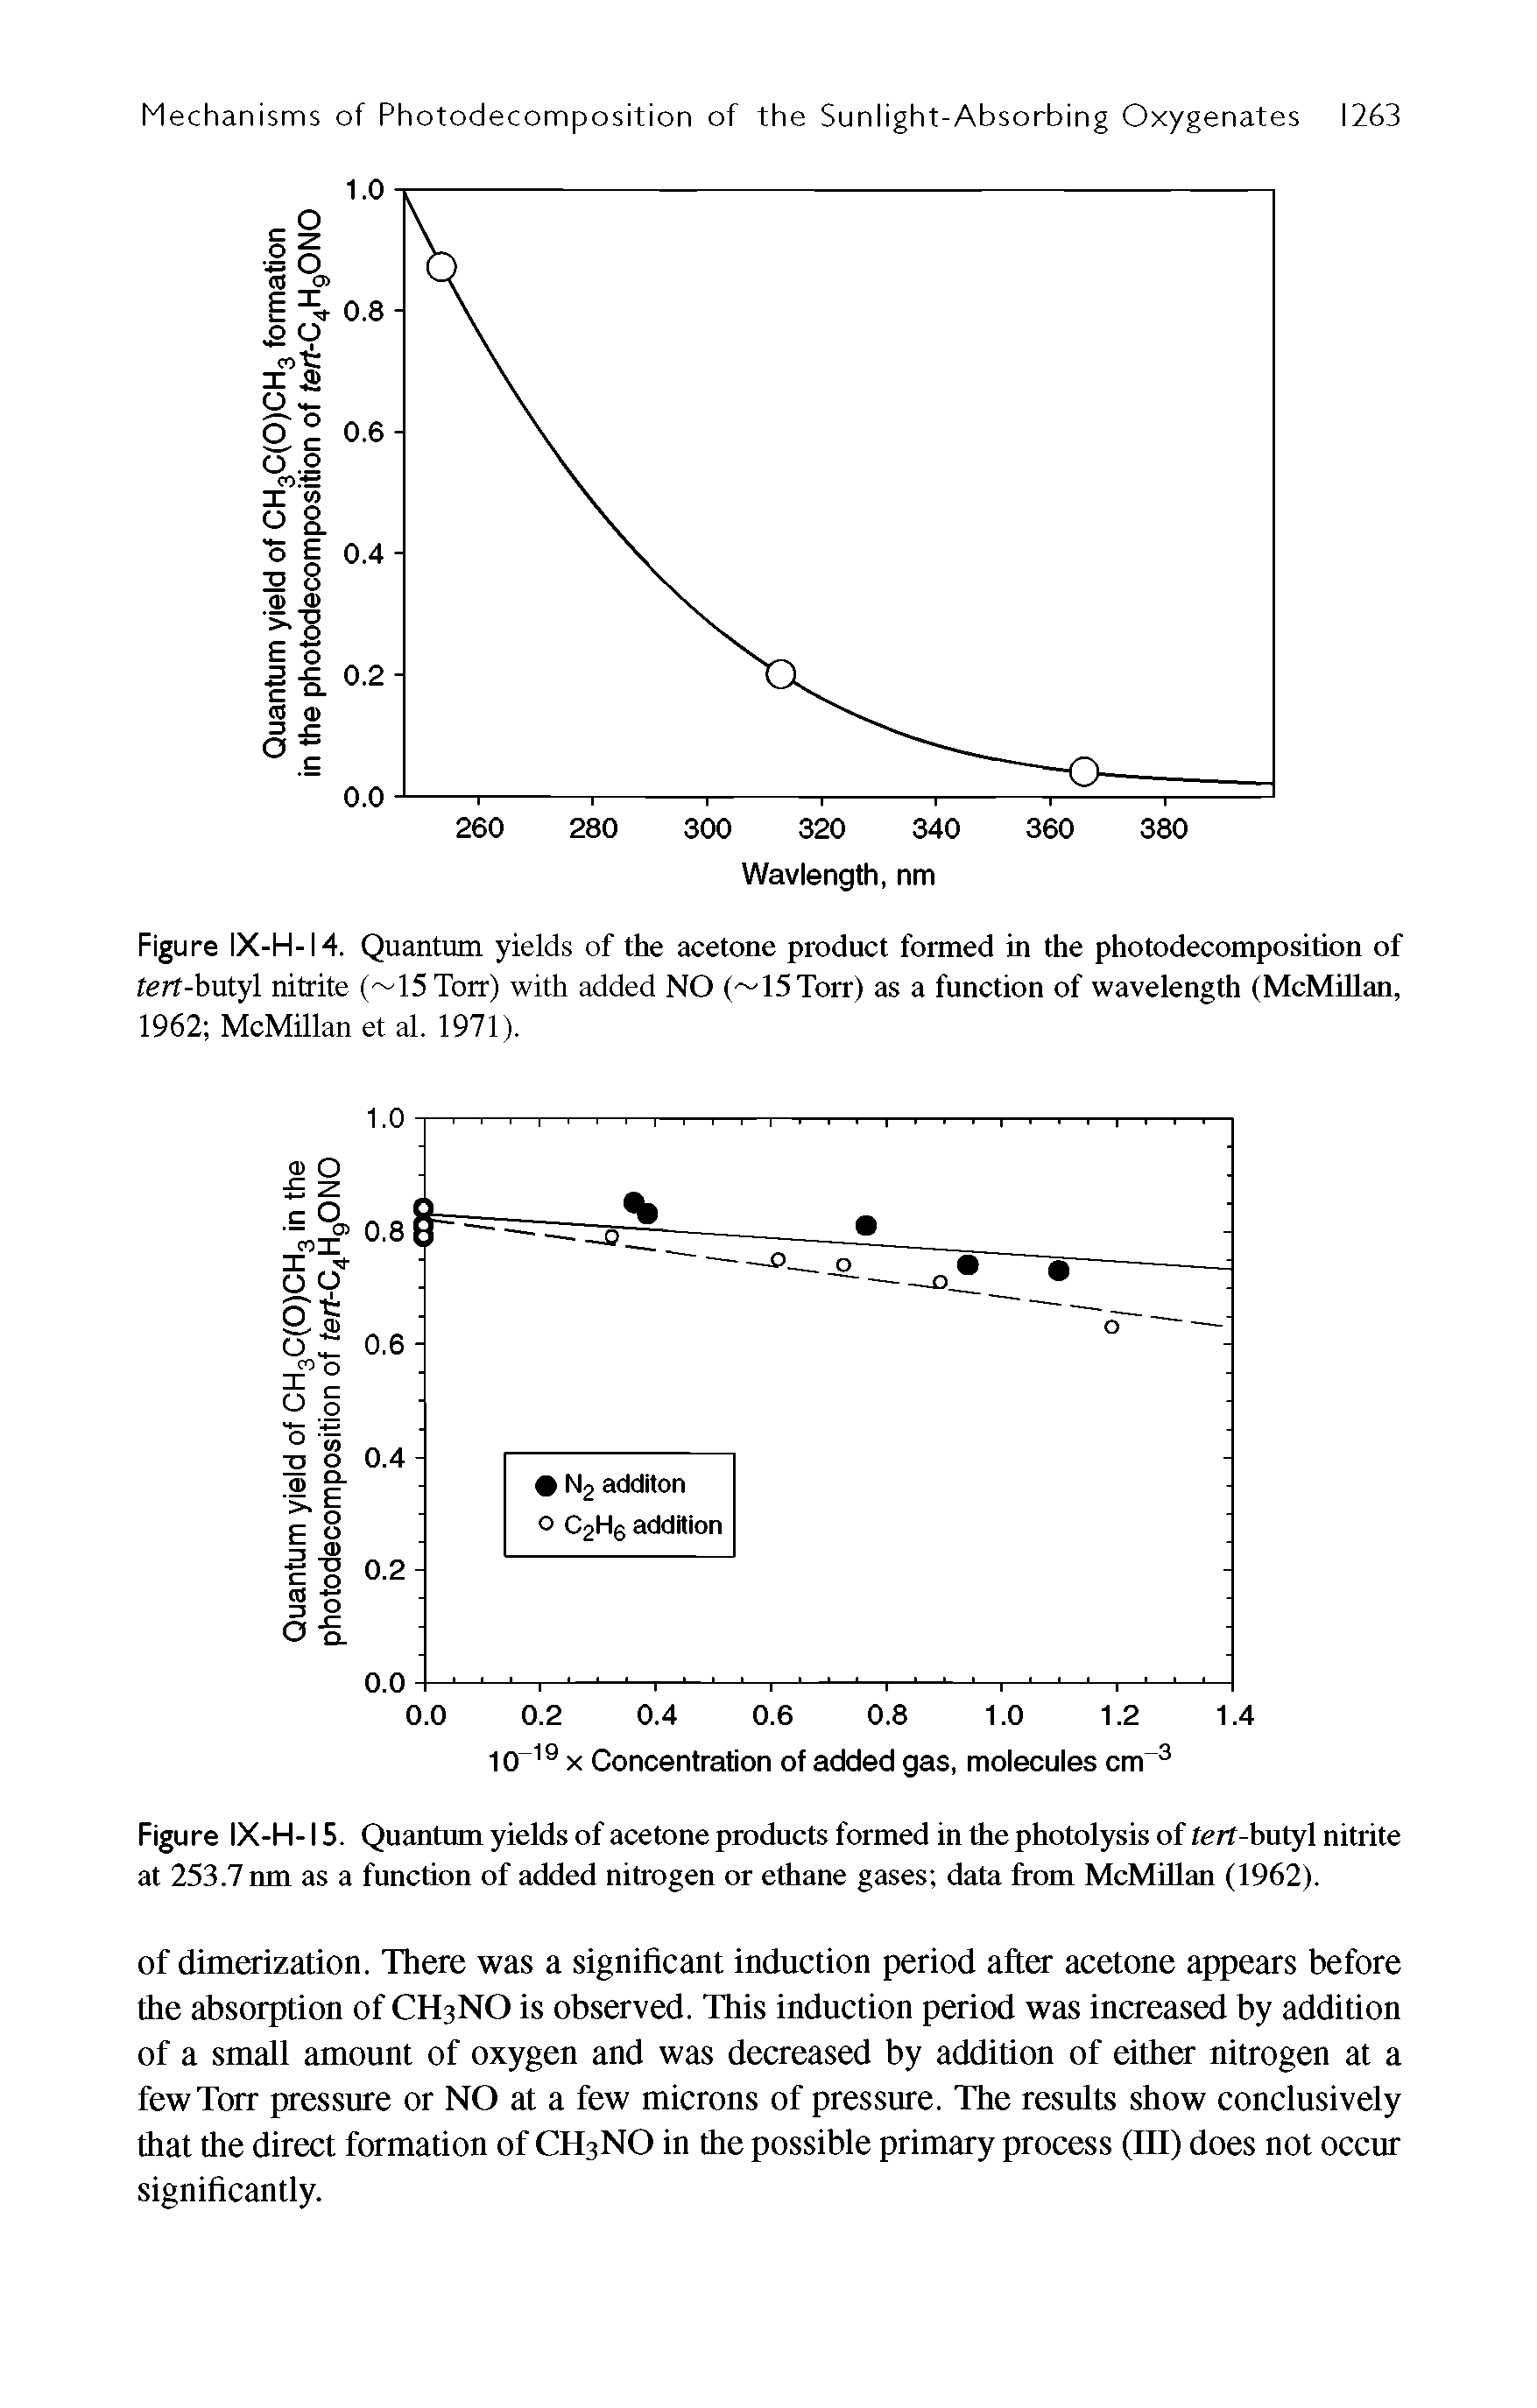 Figure IX-H-14. Quantum yields of the acetone product formed in the photodecomposition of ferf-butyl nitrite ( 15 Torr) with added NO ( 15Torr) as a function of wavelength (McMillan, 1962 McMillan et al. 1971).